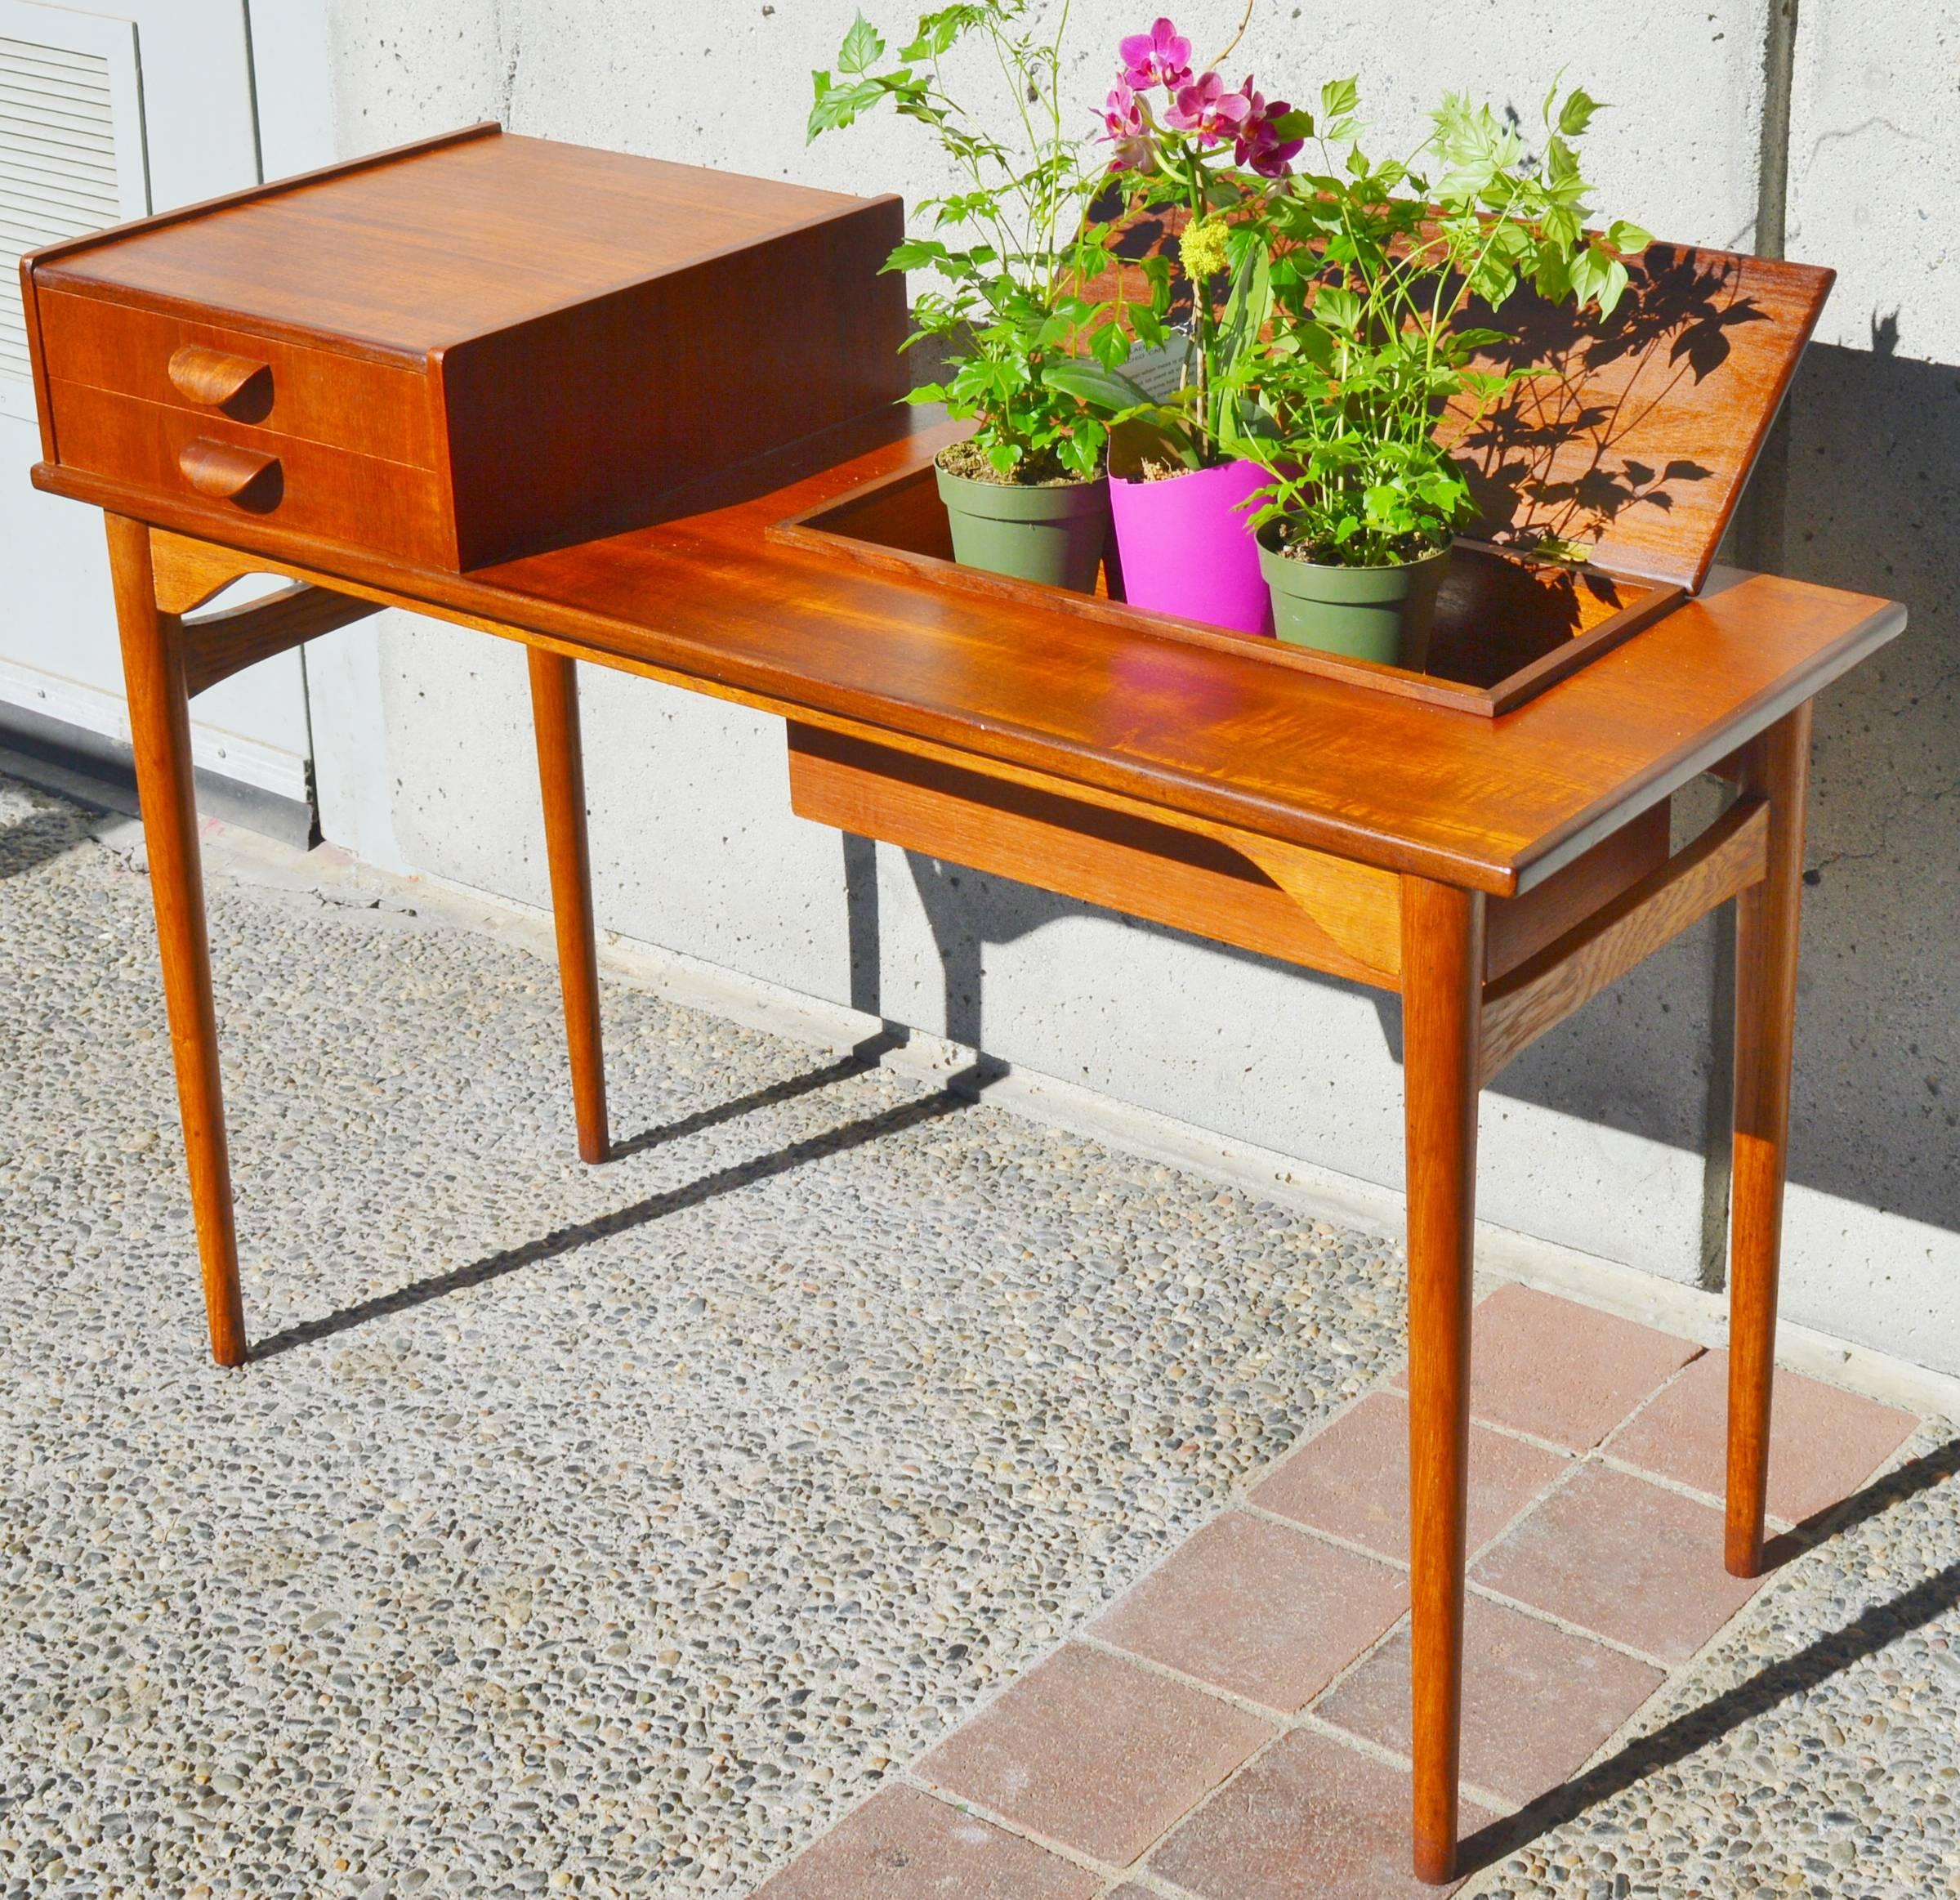 Mid-Century Modern Danish Teak and Oak Sofa or Hall Table with Lift Top Storage or Planter